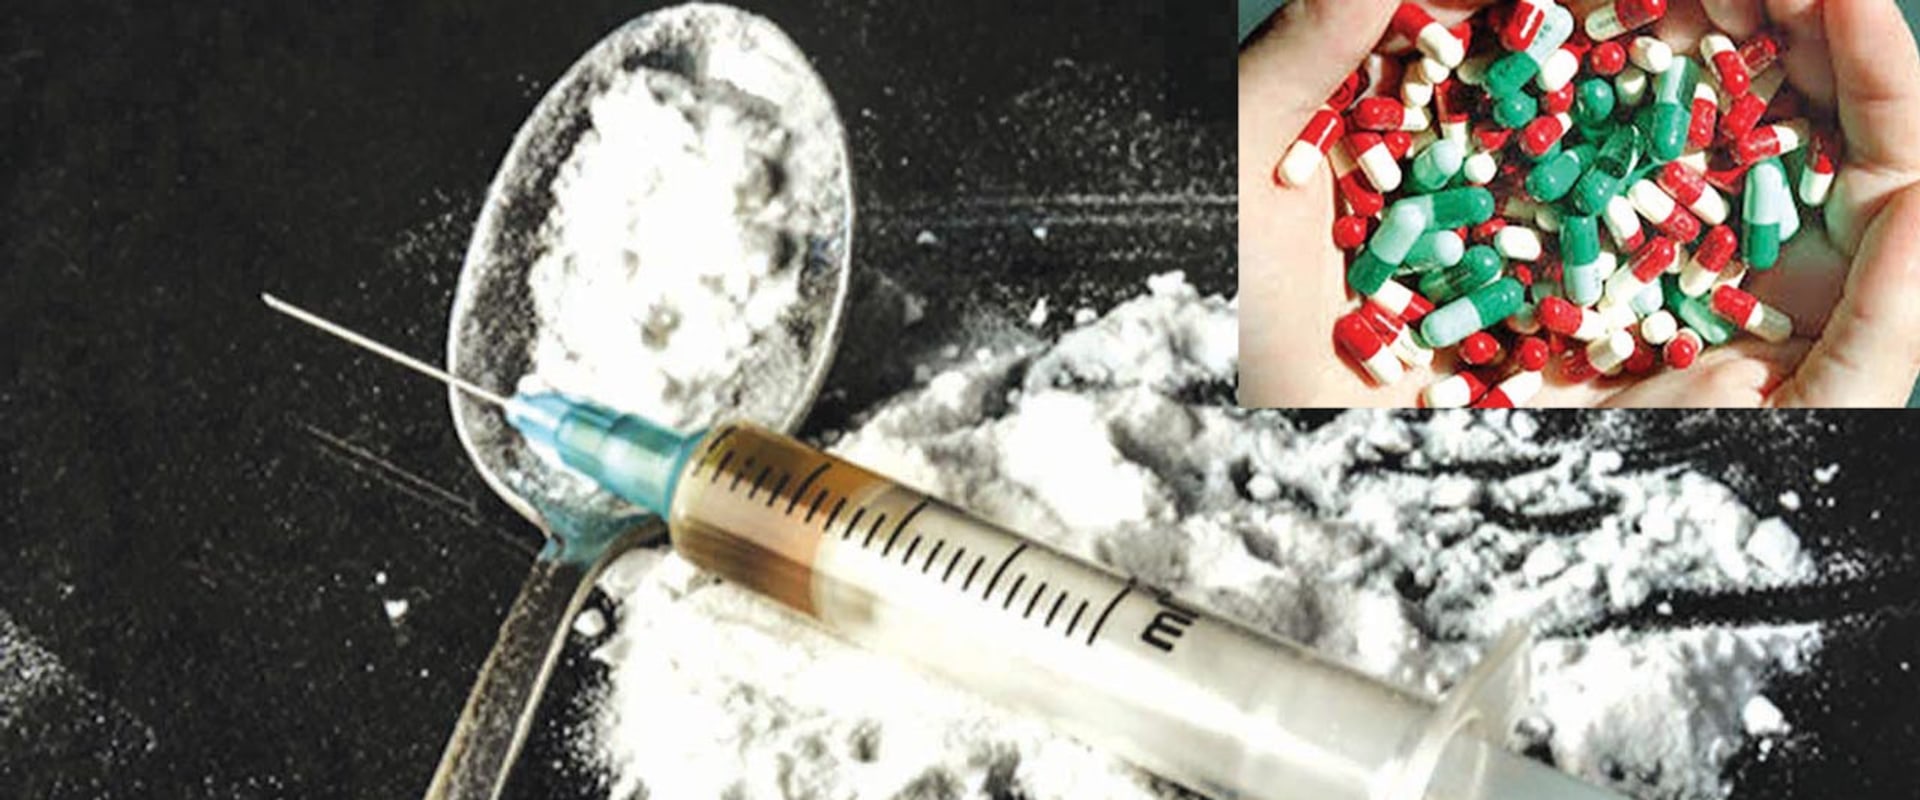 What are effects of drug trafficking?